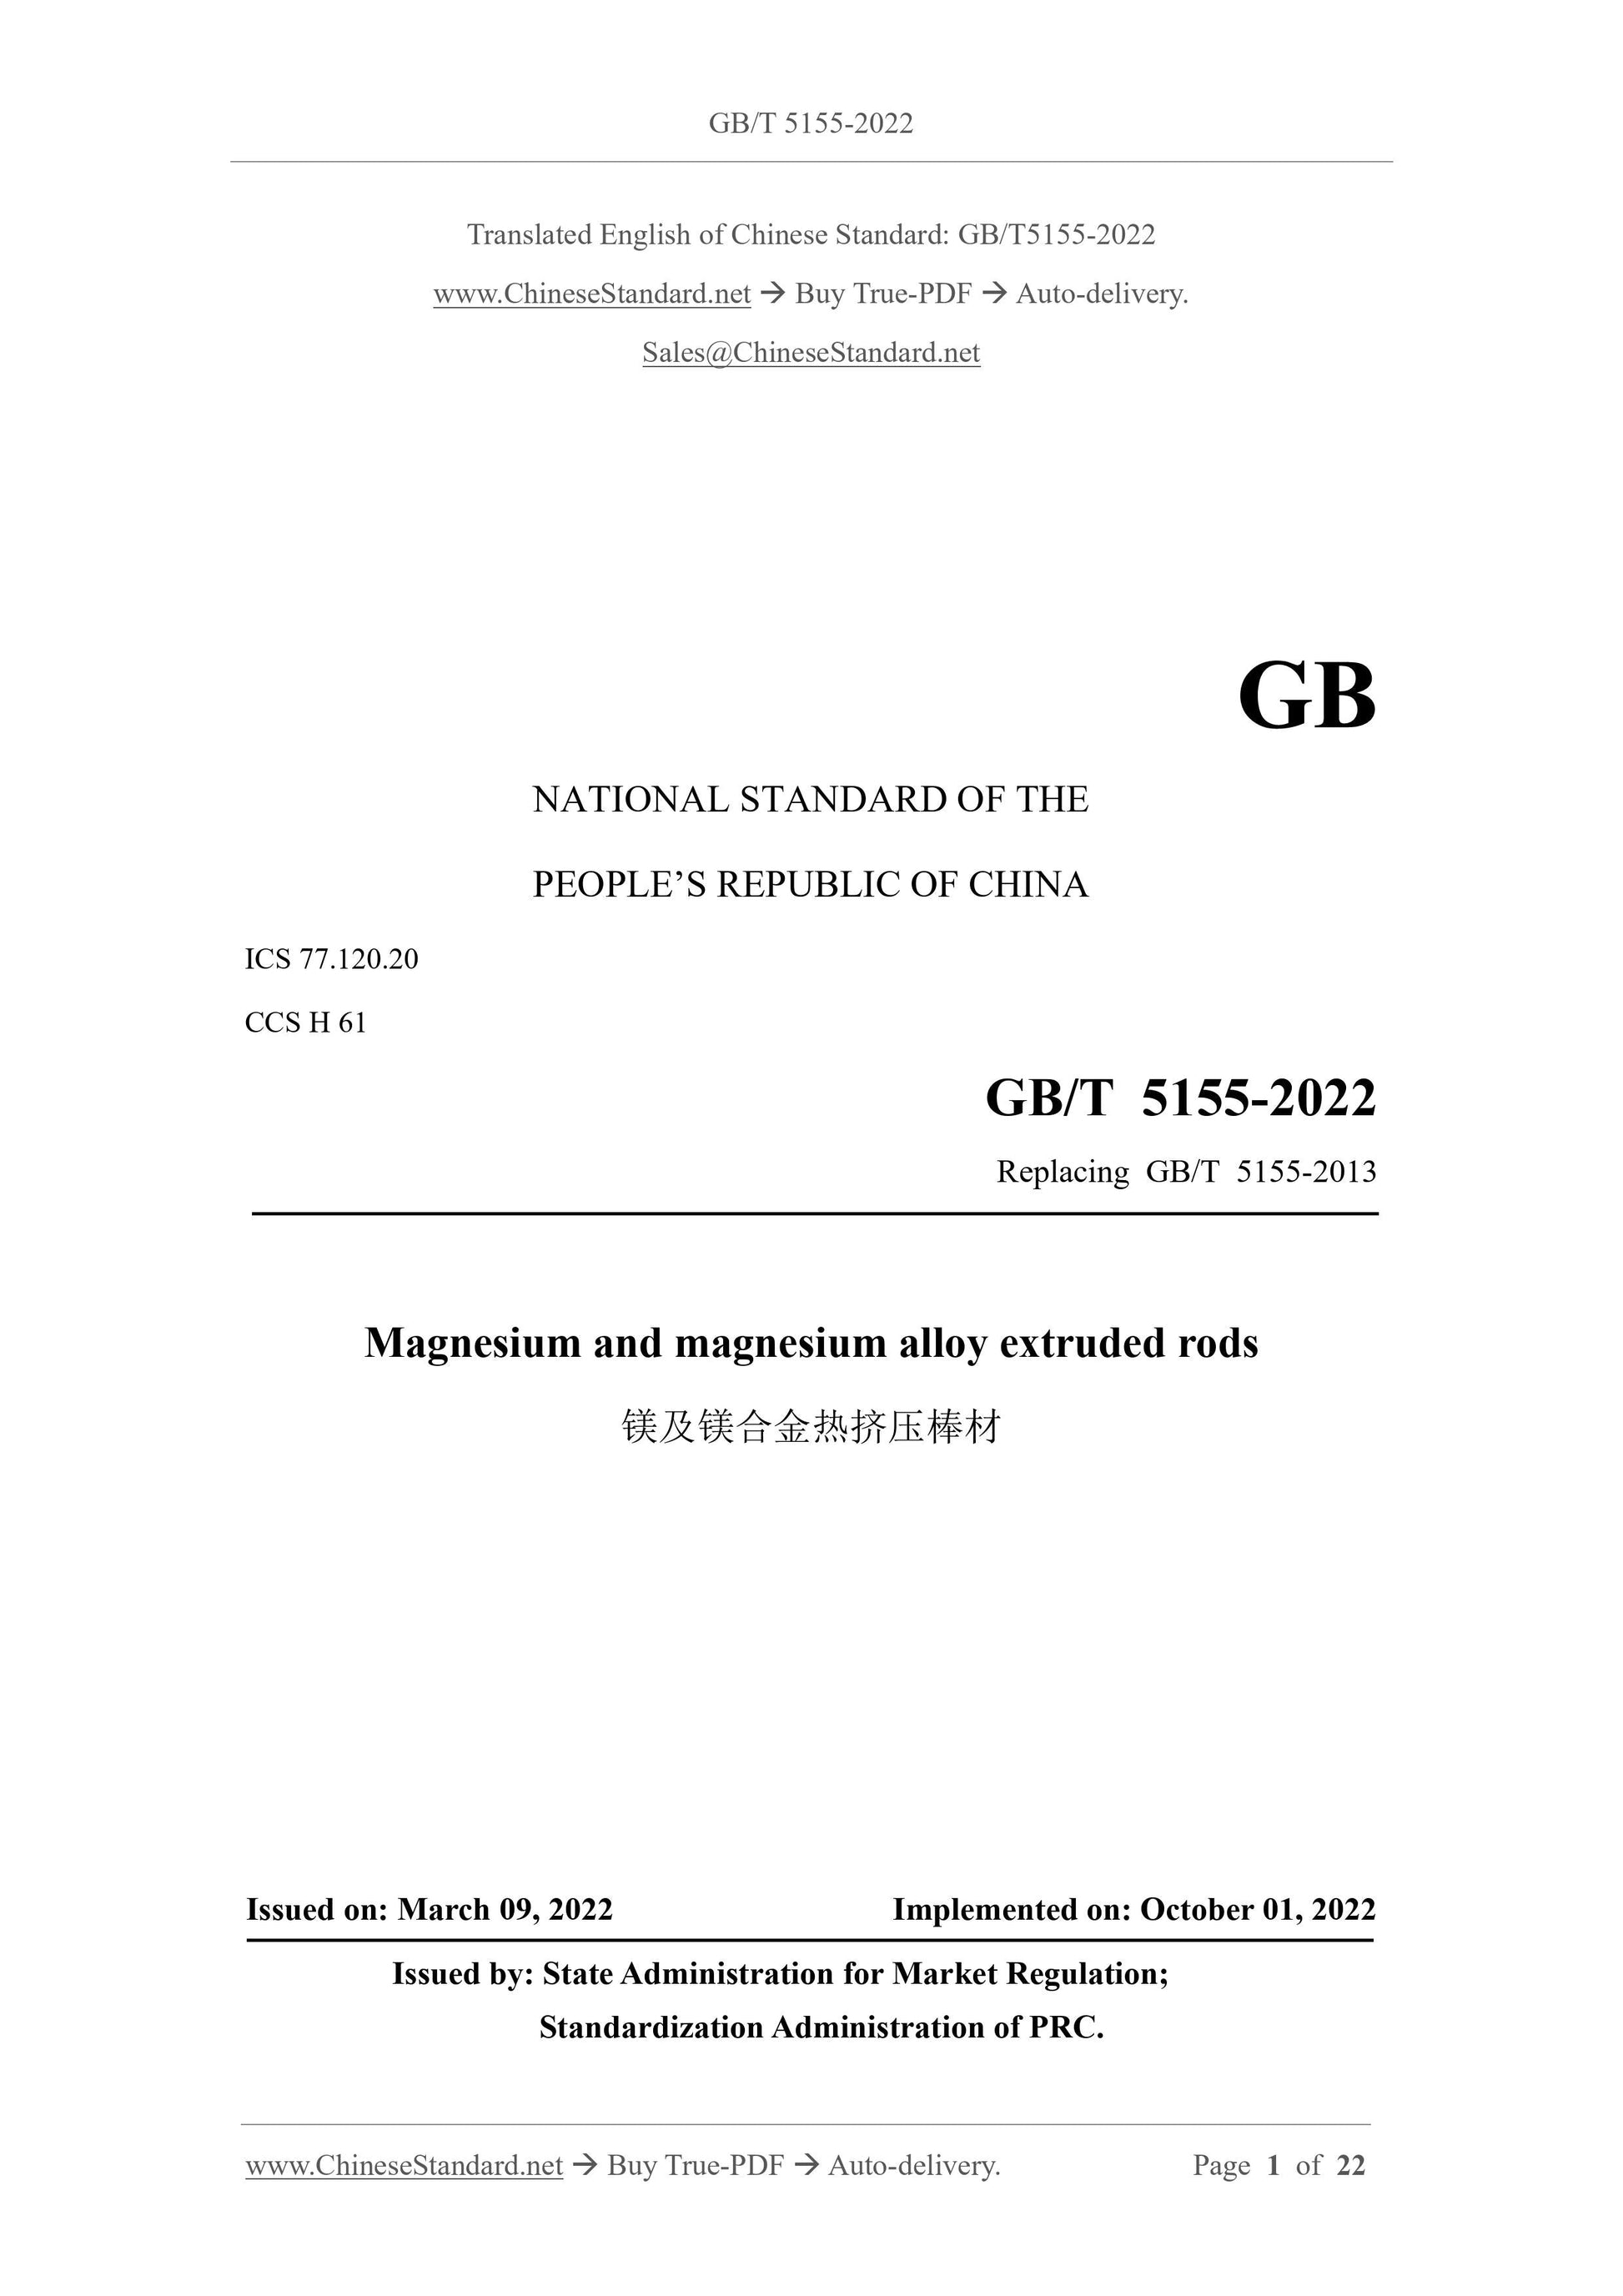 GB/T 5155-2022 Page 1